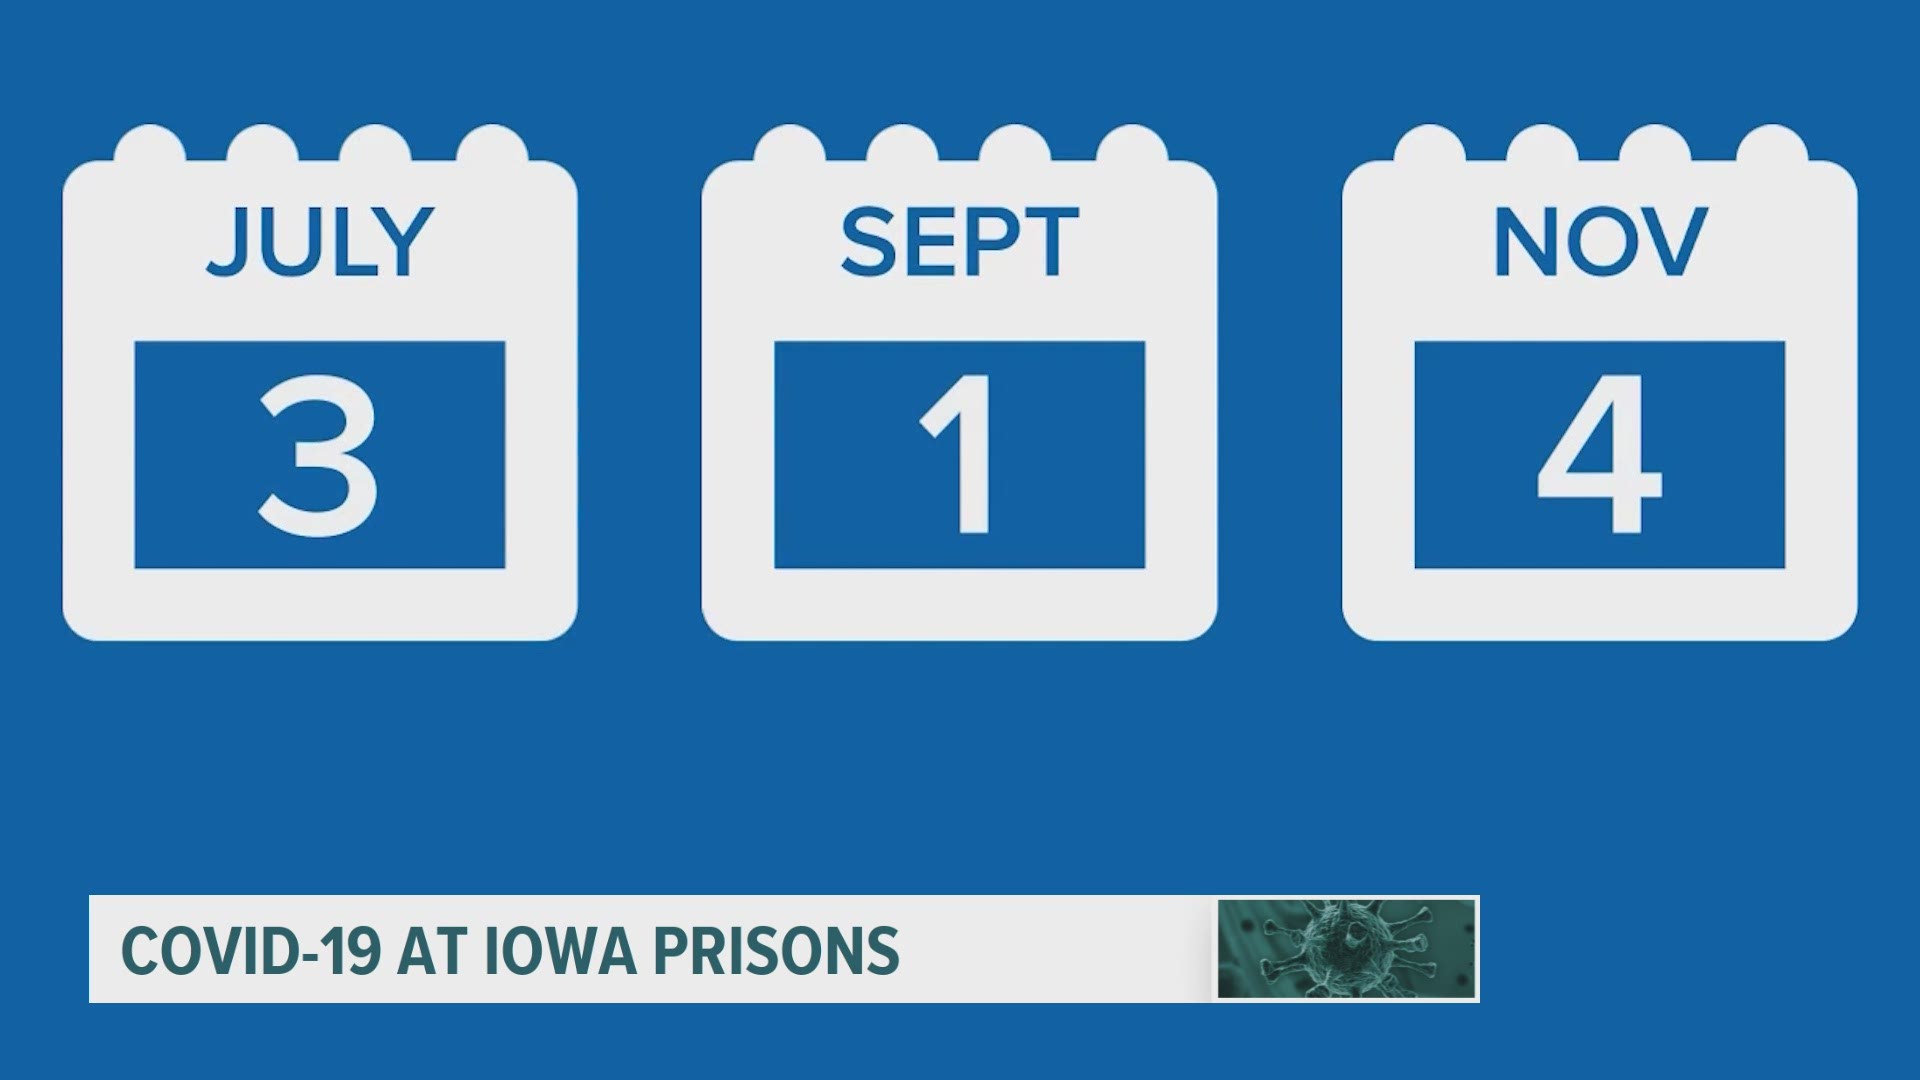 Three prisoners have died this week from COVID-19.